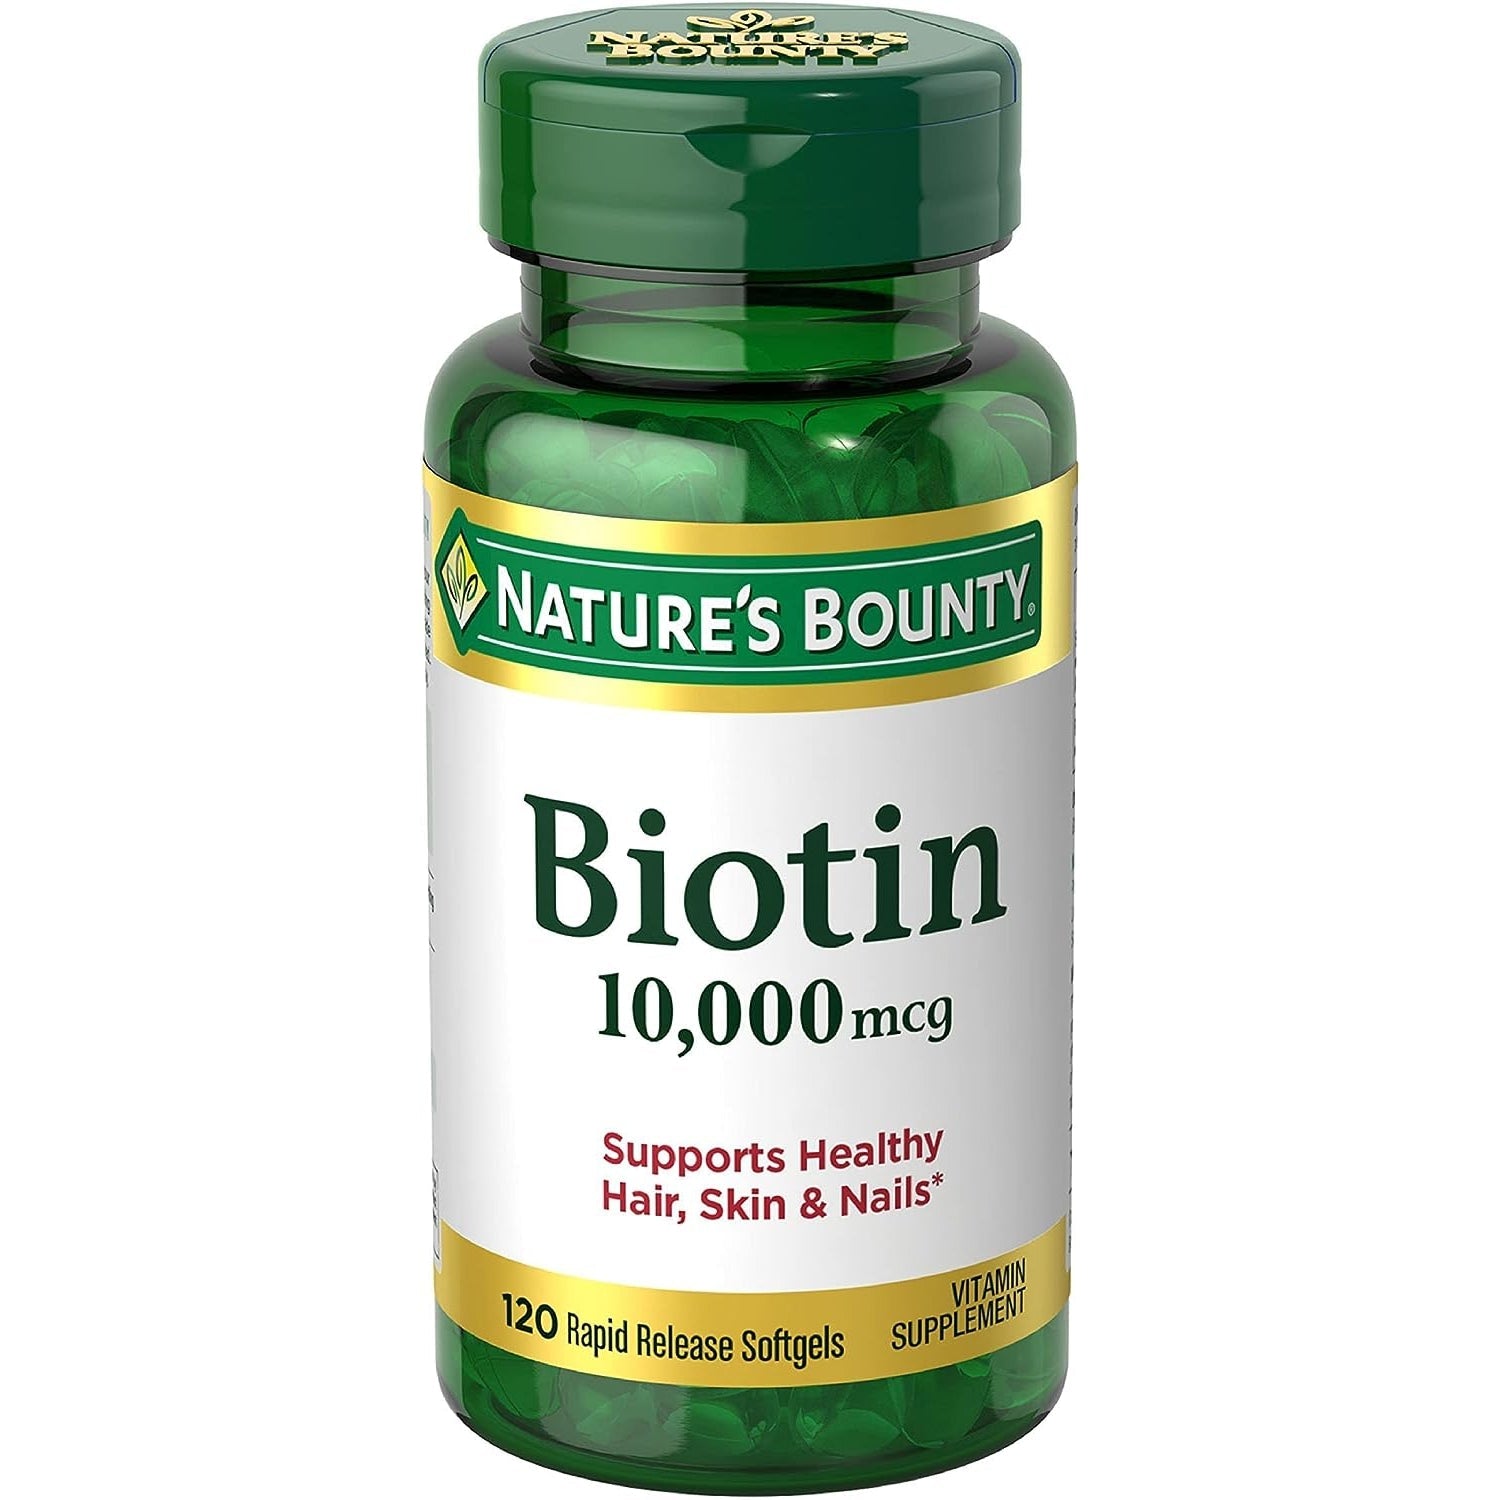 Nature's Bounty Biotin, Supports Healthy Hair, Skin and Nails, 10,000 mcg, Rapid Release Softgels, 120 Softgels